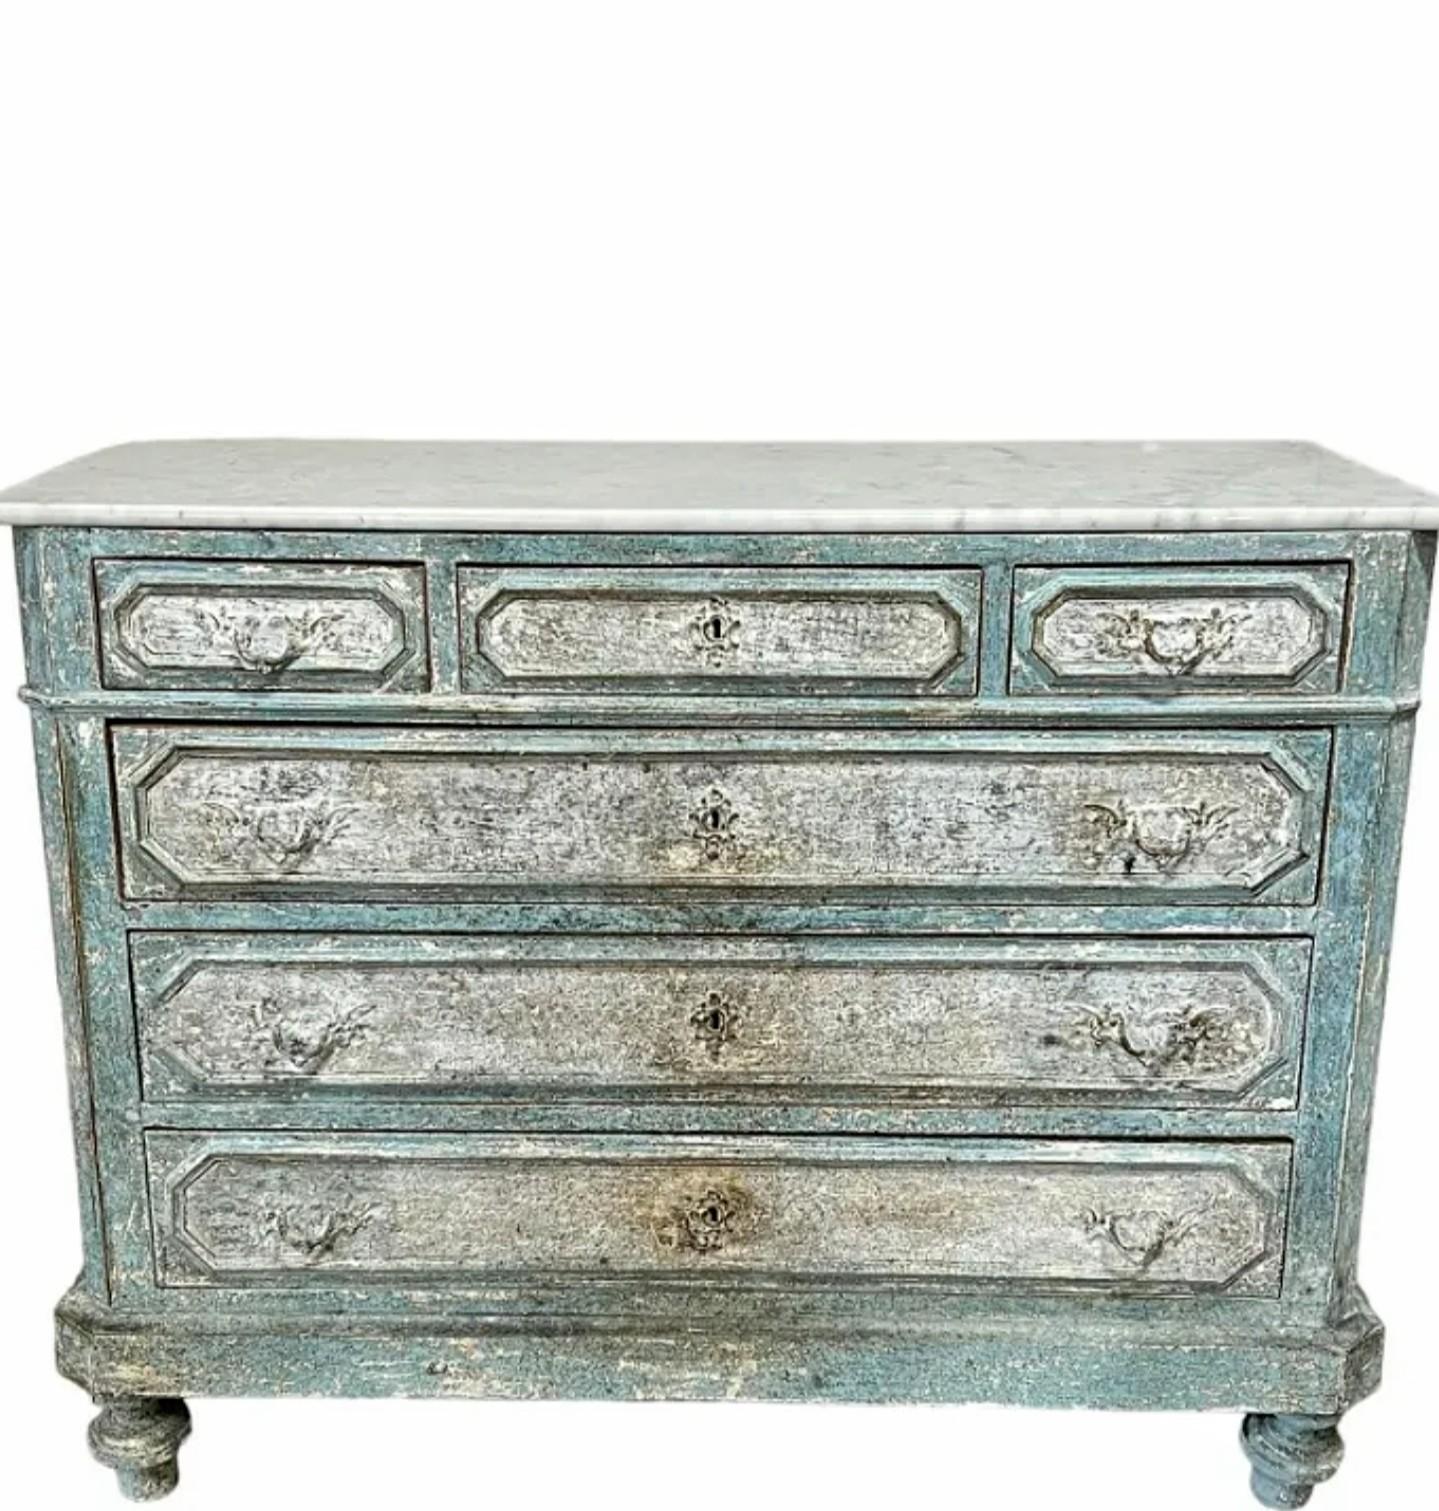 A stunning period Louis XVI (1774-1793) French commode in the original paint finish. 

Hand-crafted in France in the 18th century, exceptionally executed in refined luxurious Neoclassical Louis XVI taste, having a rectangular white marble top over